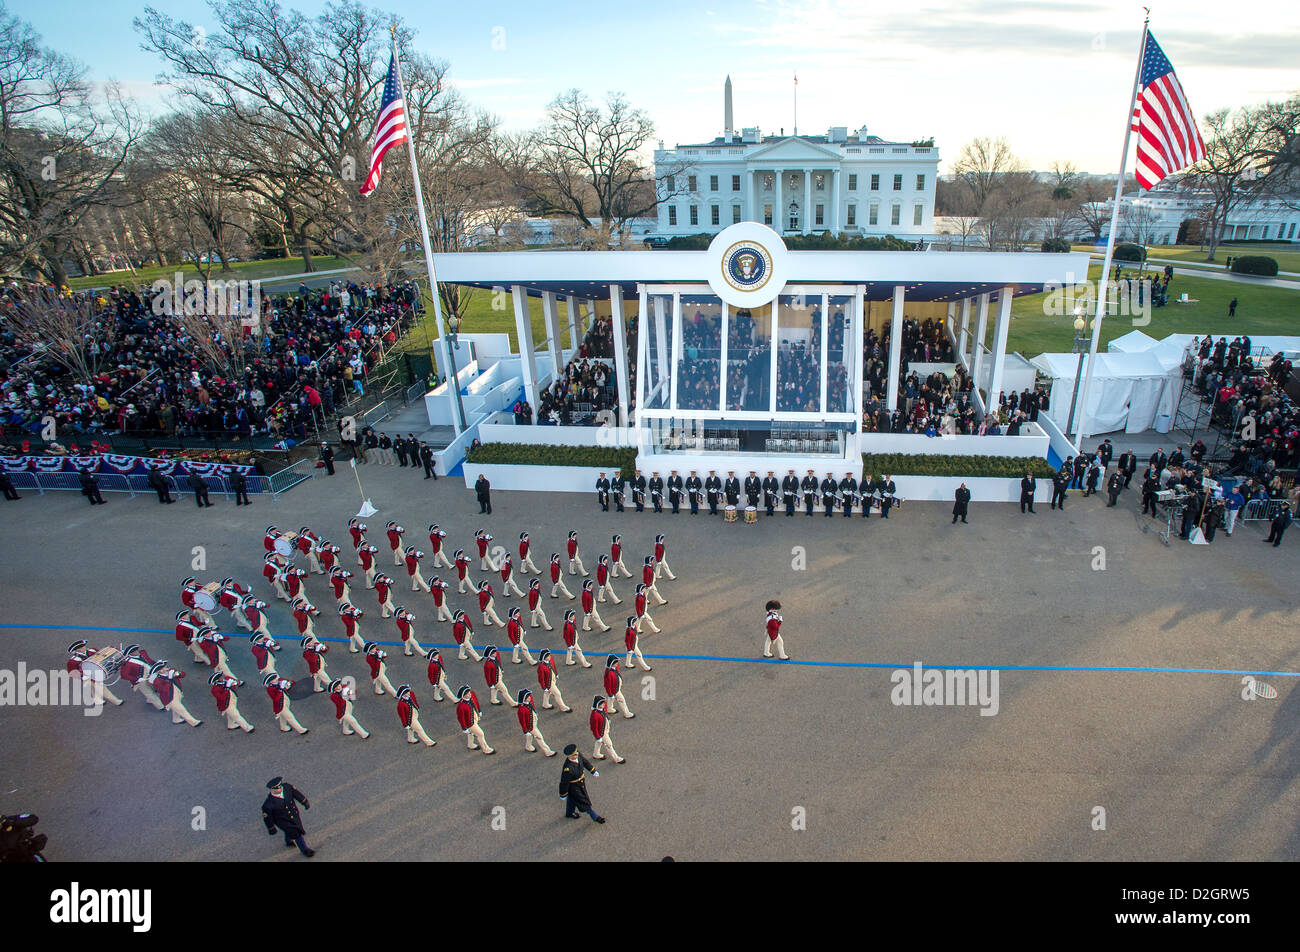 The US Army Old Guard Fife and Drum Corps marches past the the Presidential viewing during the inaugural parade January 21, 2013 in Washington, DC. Obama was sworn-in as the nation's 44th President earlier in the day. Stock Photo